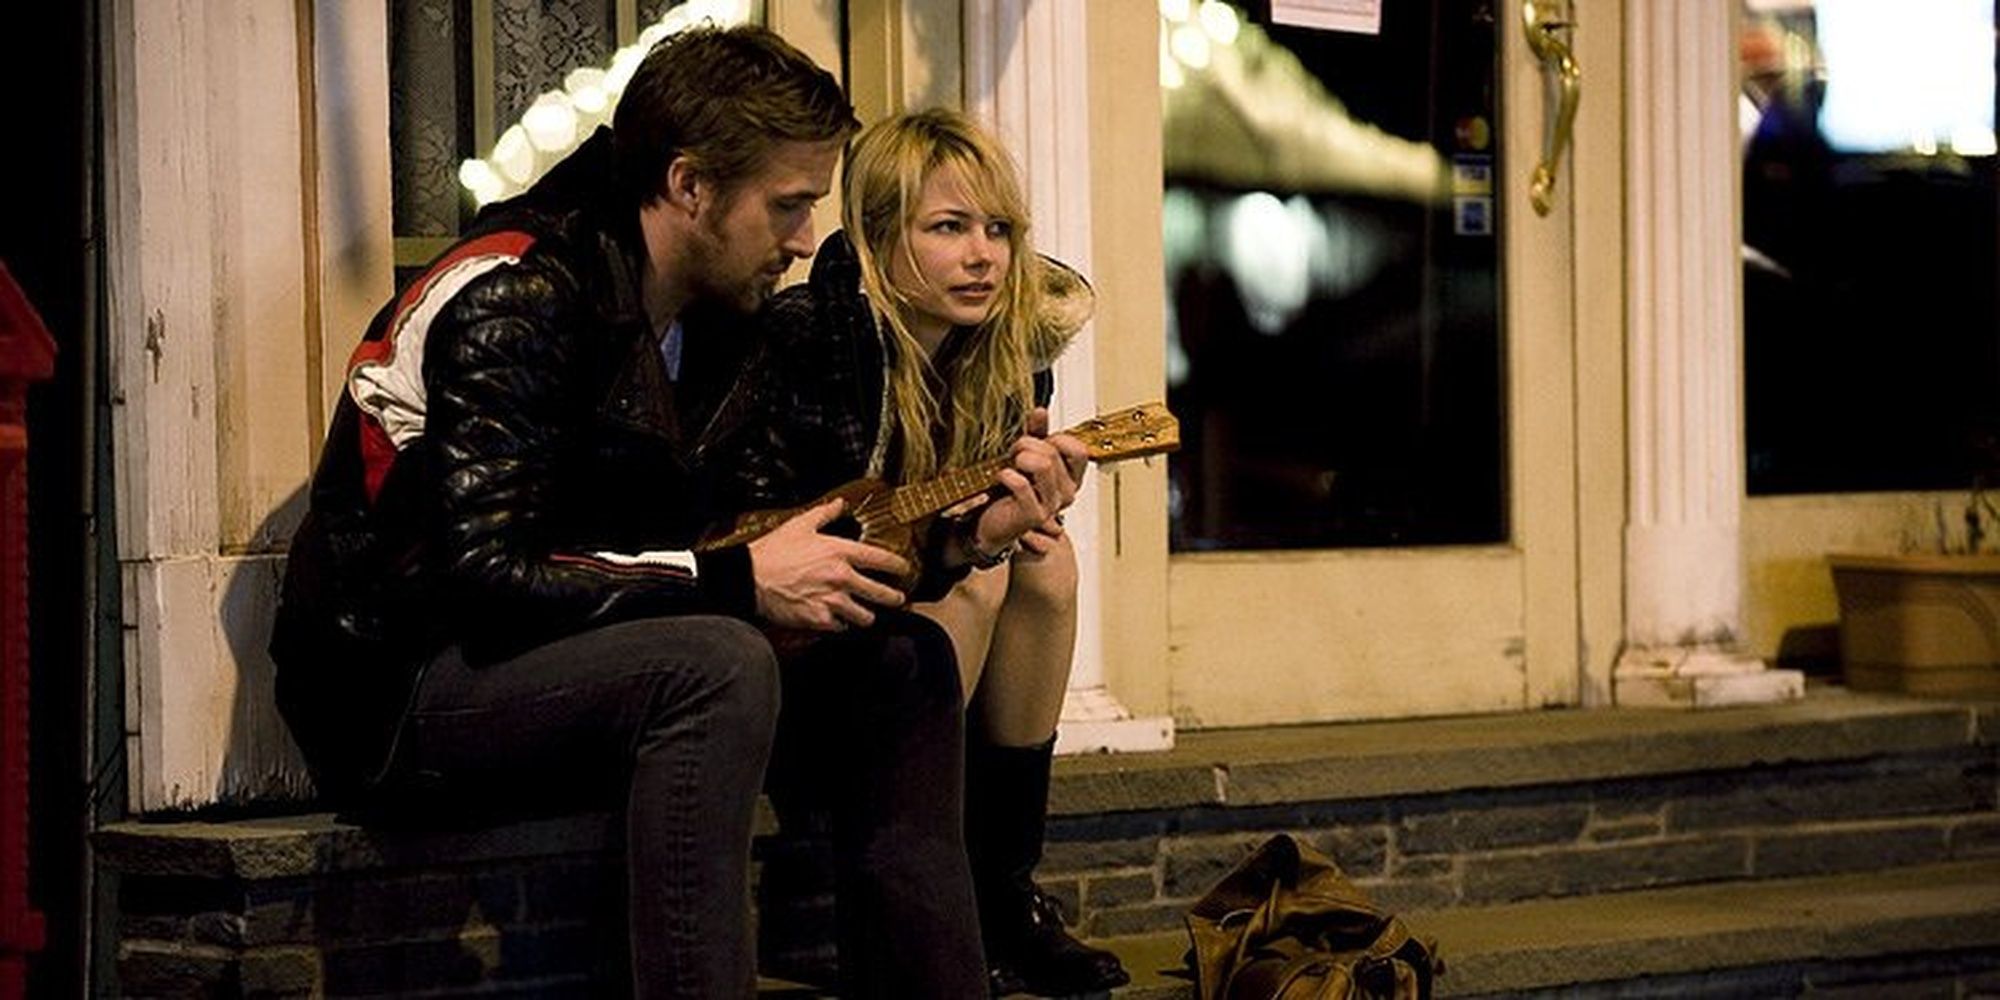 Ryan Gosling as Dean and Michelle Williams as Cindy in 'Blue Valentine'